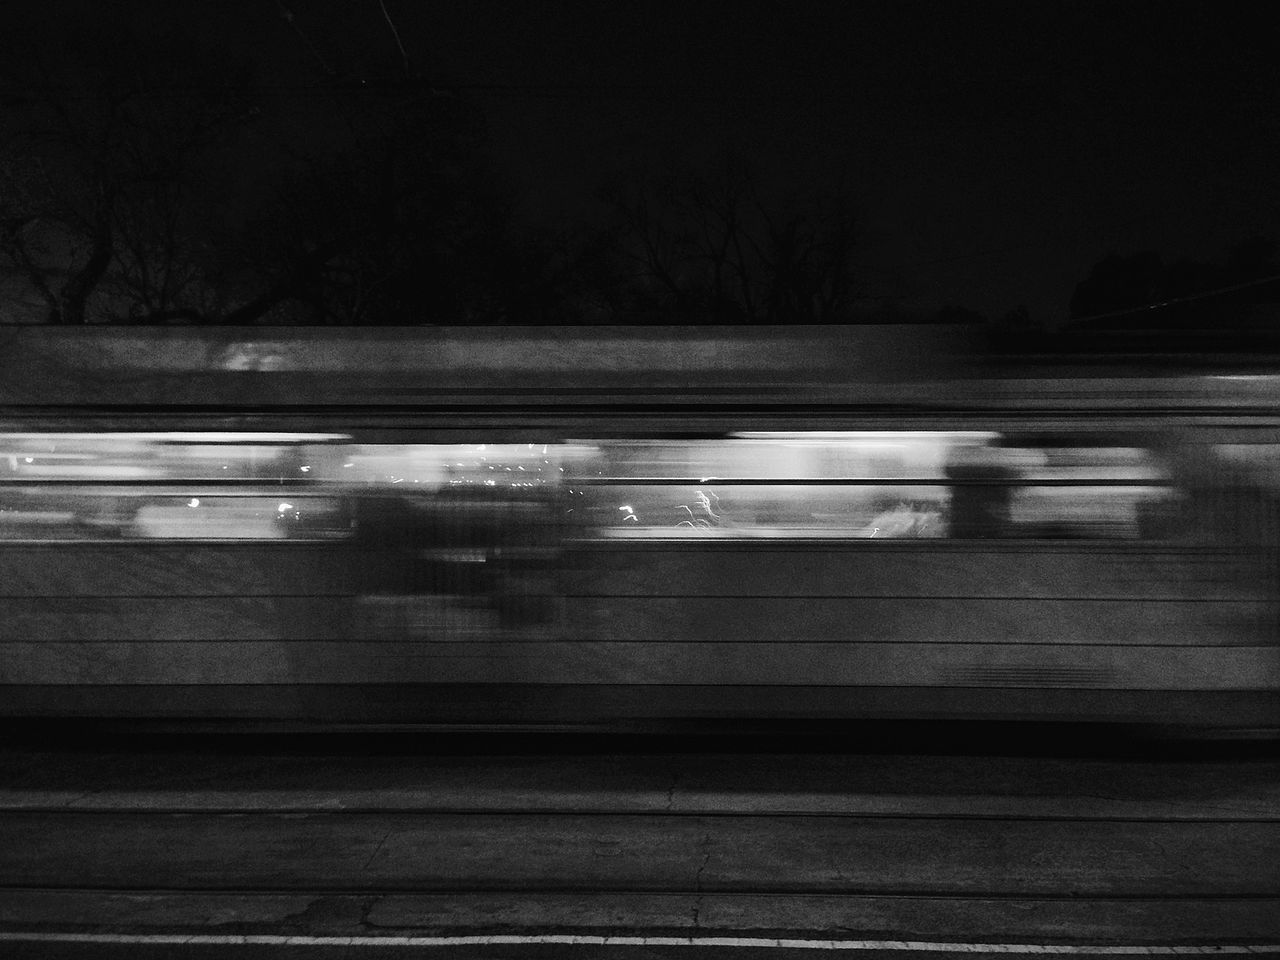 night, transportation, illuminated, railroad track, rail transportation, railroad station platform, railroad station, public transportation, mode of transport, dark, blurred motion, train - vehicle, street, motion, built structure, on the move, road, outdoors